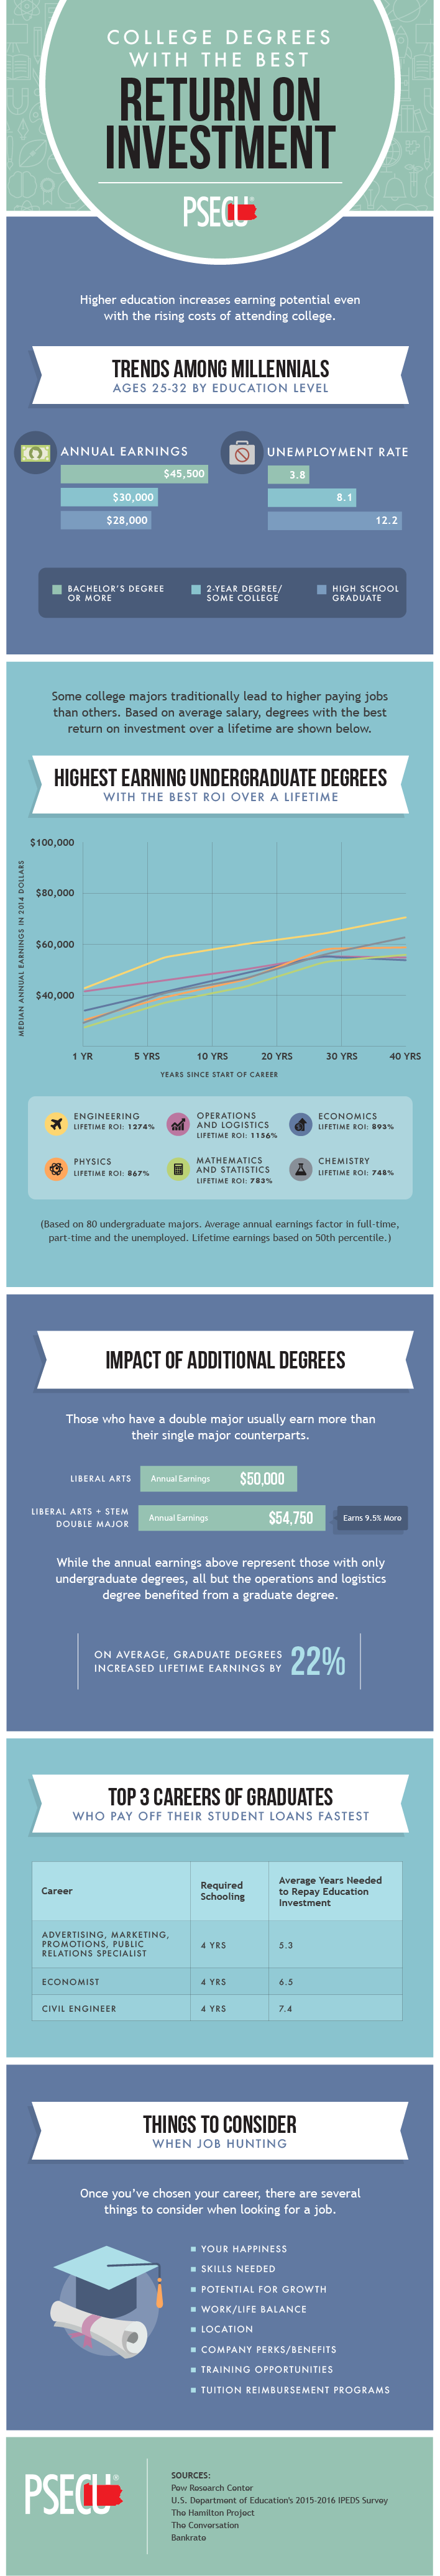 College Degrees with the Highest ROI